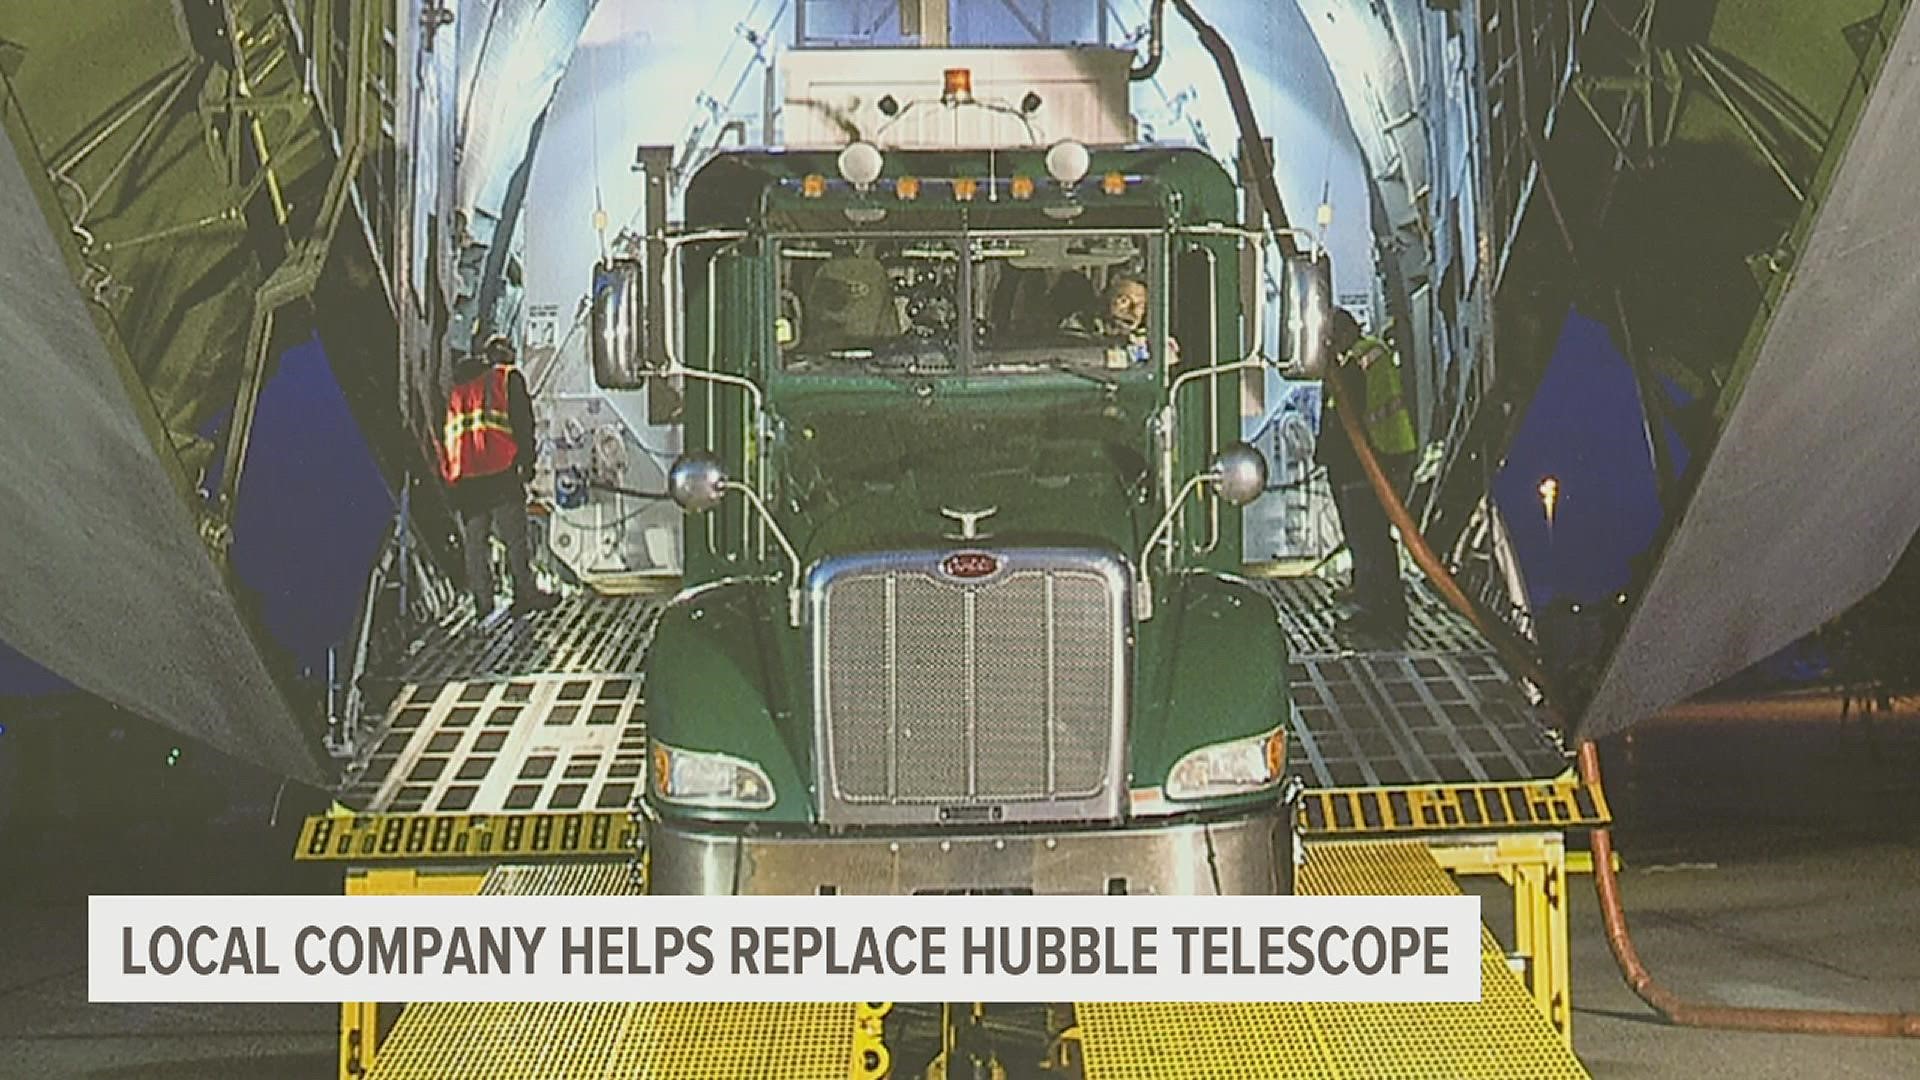 In 2 months, NASA will launch a new telescope to replace the aging Hubble Telescope, and Summers Trucking in Ephrata helped move the replacement to its launch site.